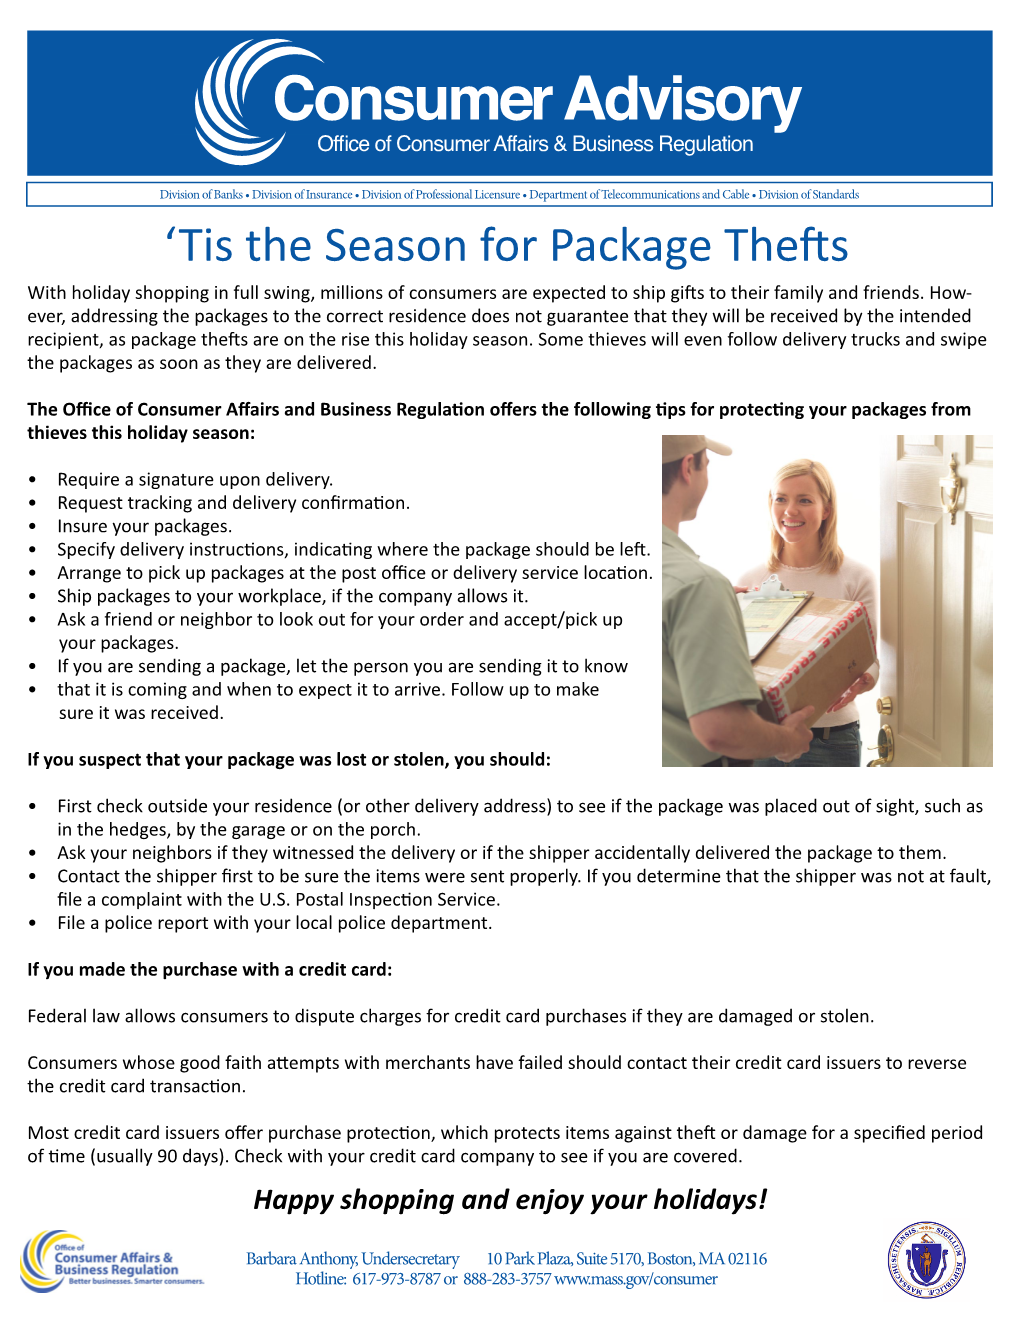 'Tis the Season for Package Thefts